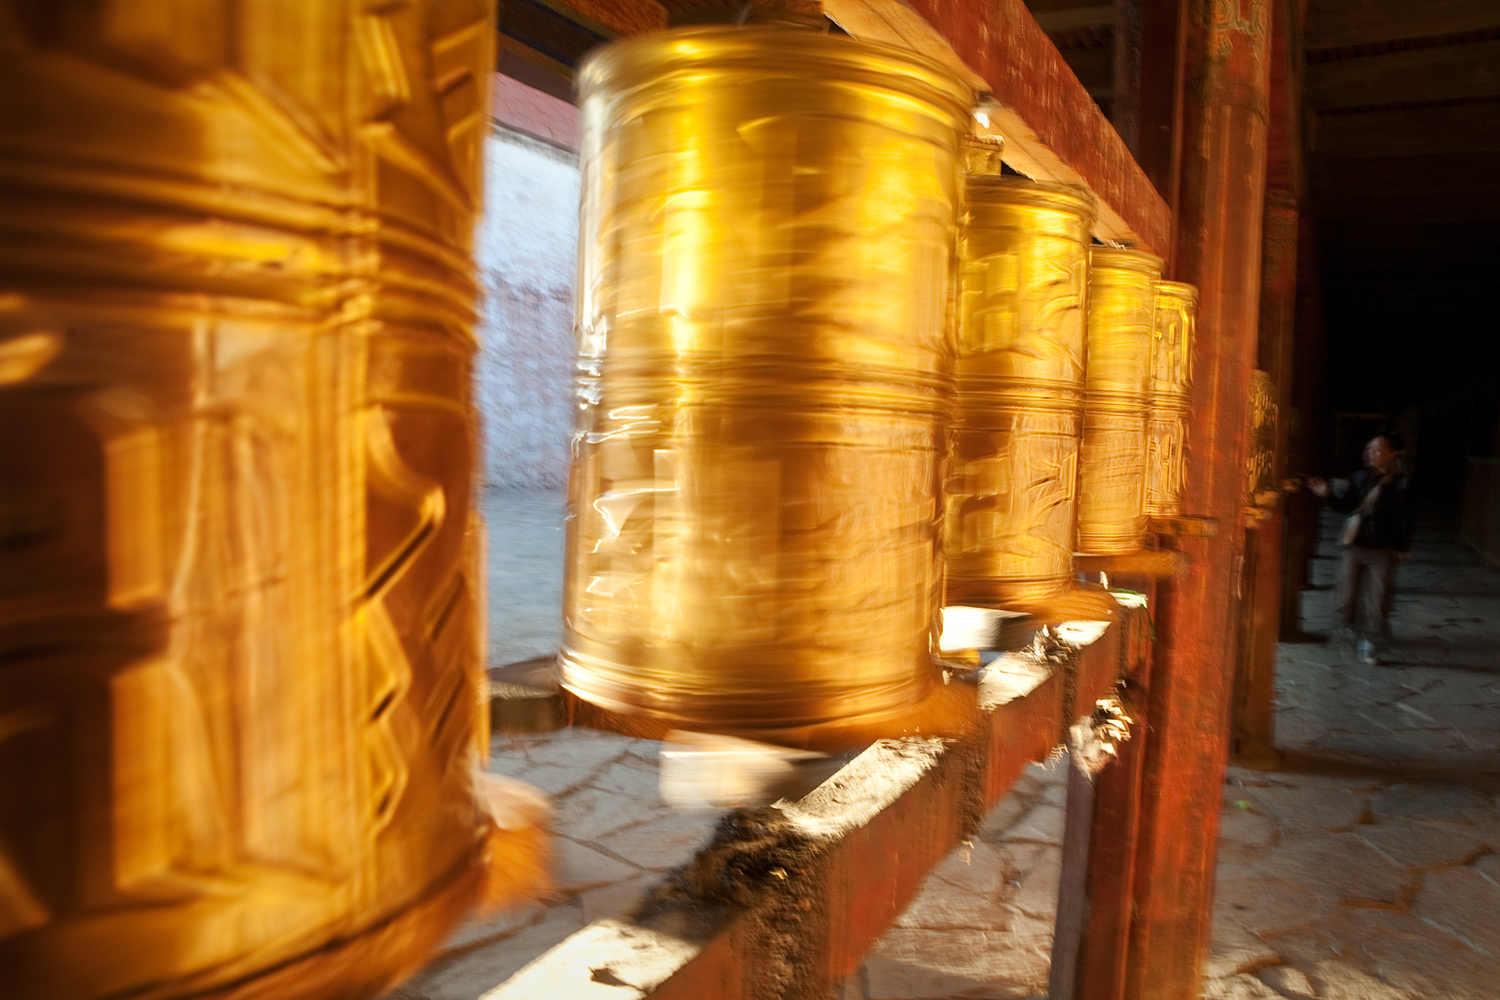  When a prayer wheel is spun, Tibetan Buddhists believe the mantra carved on it is activated. 